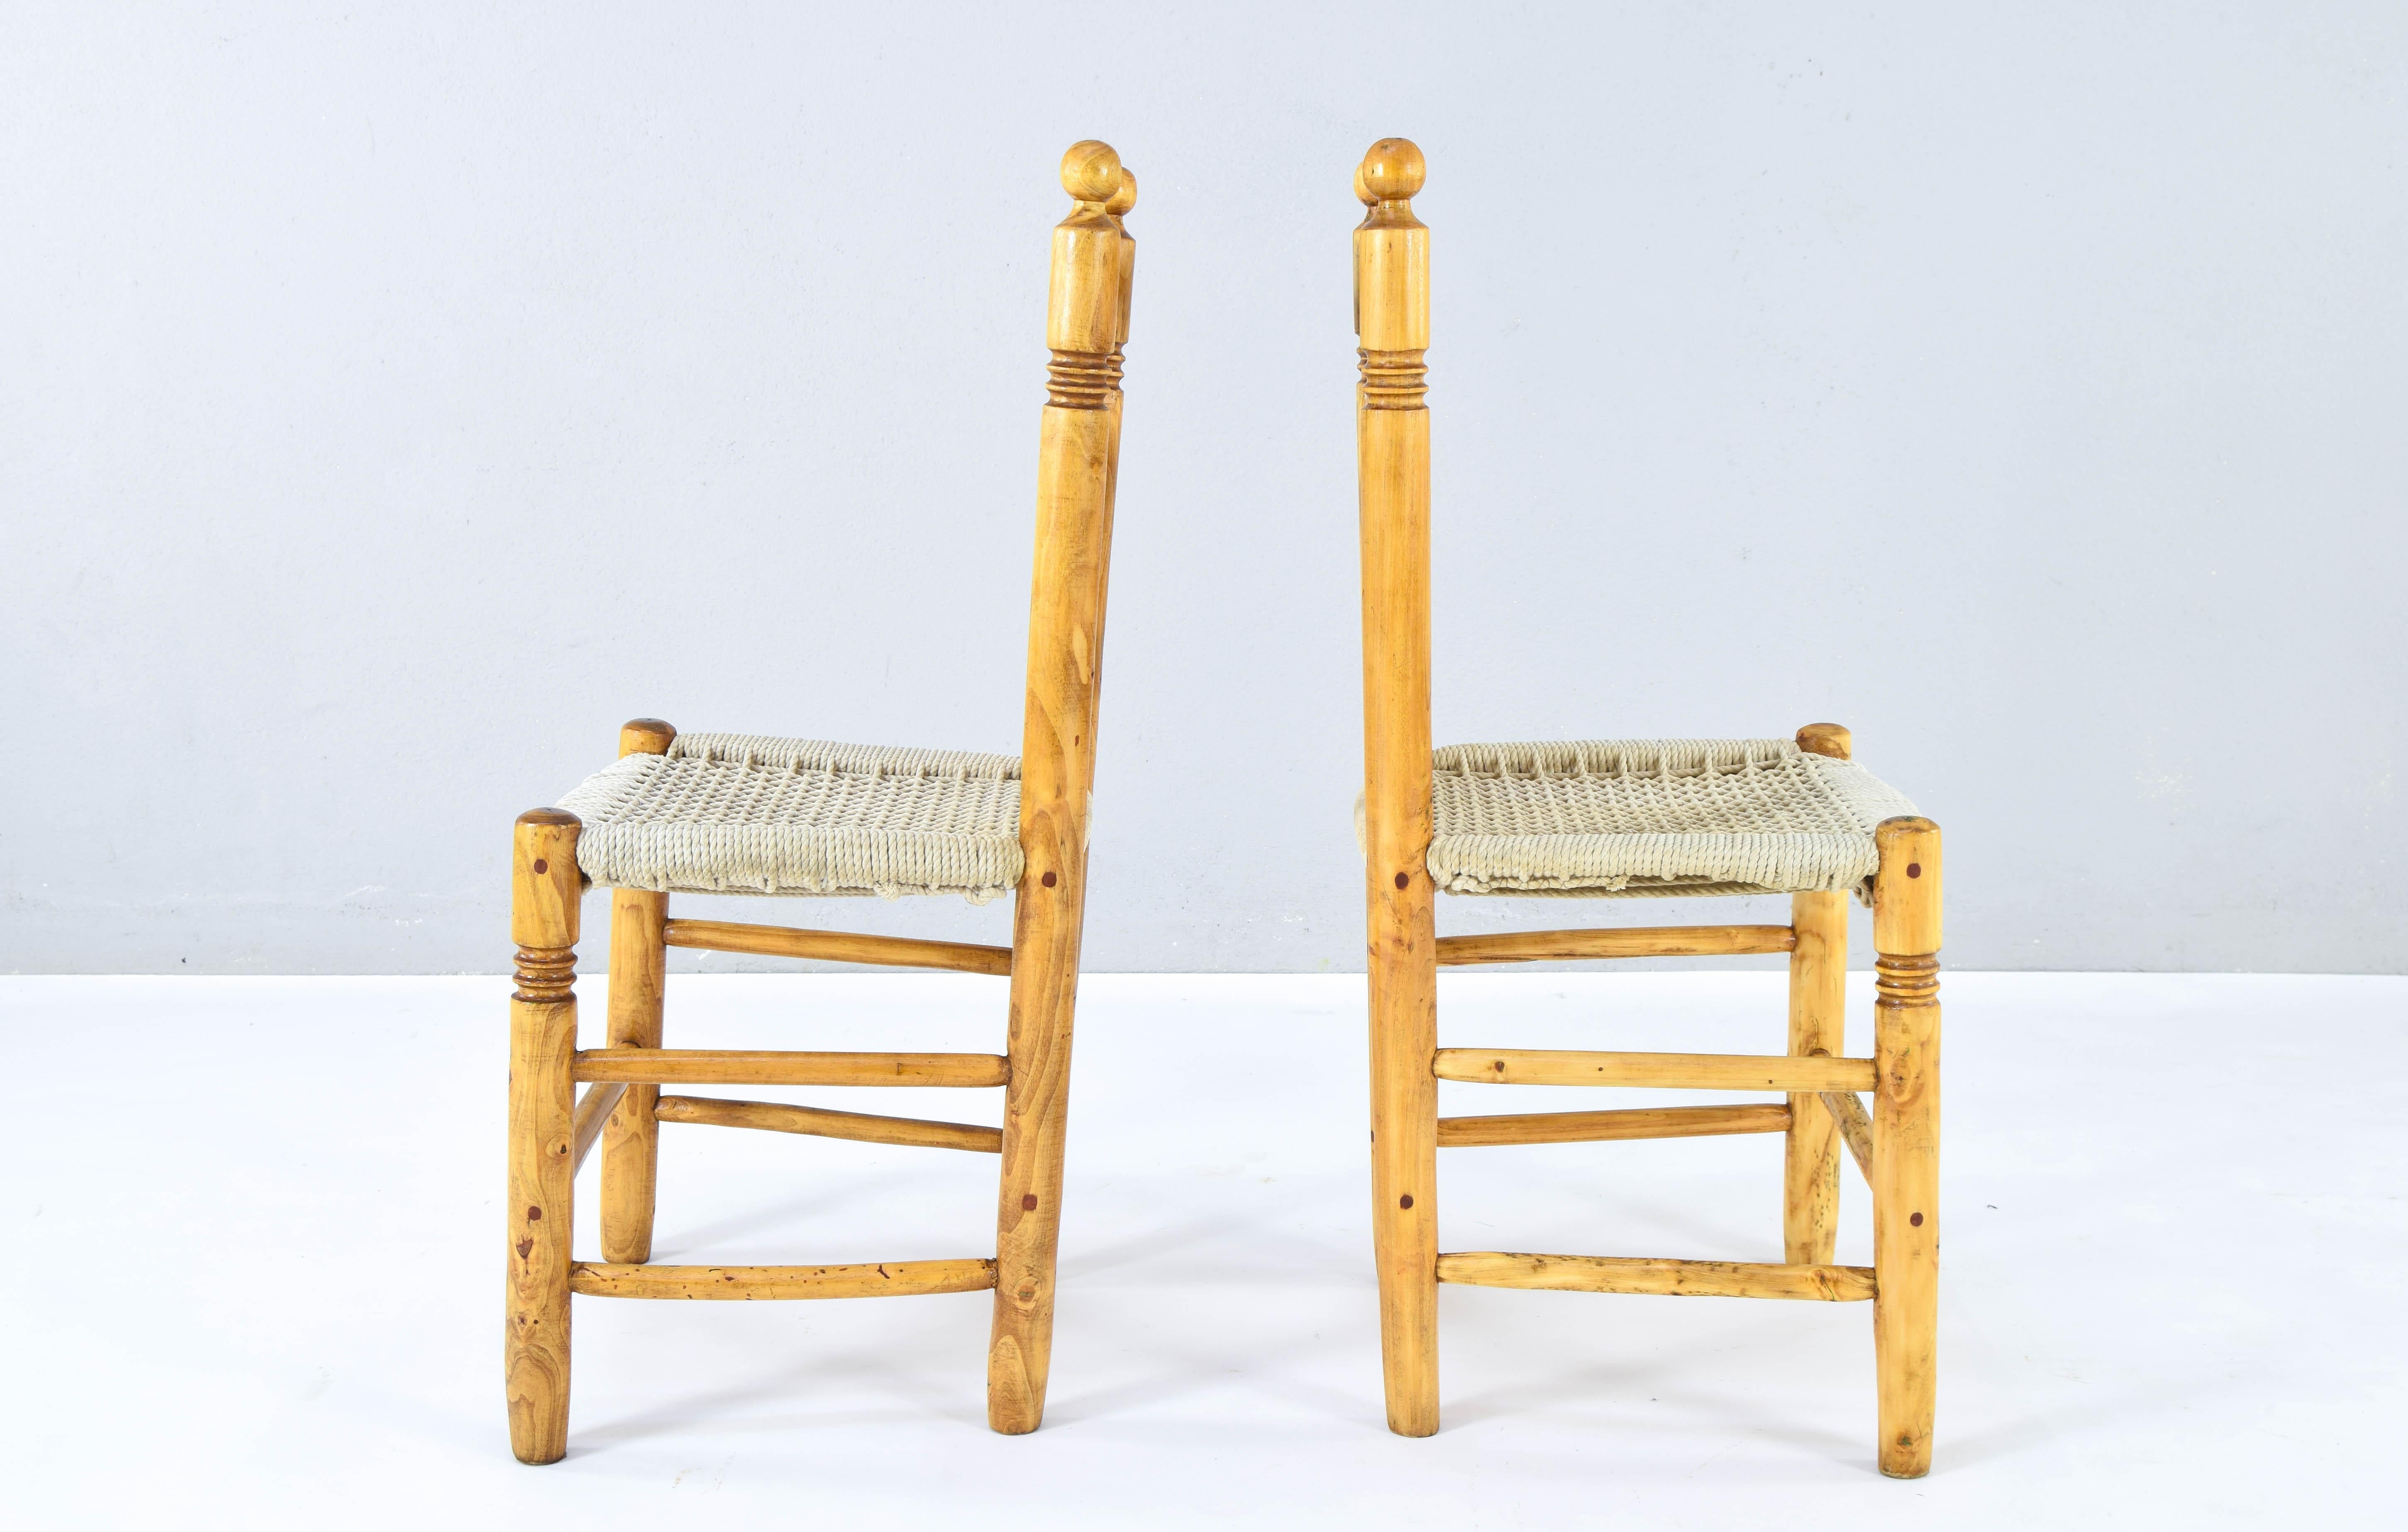 Antique low Traditional Andalusian Mediterranean Chairs made of Wood and Rope In Fair Condition For Sale In Escalona, Toledo